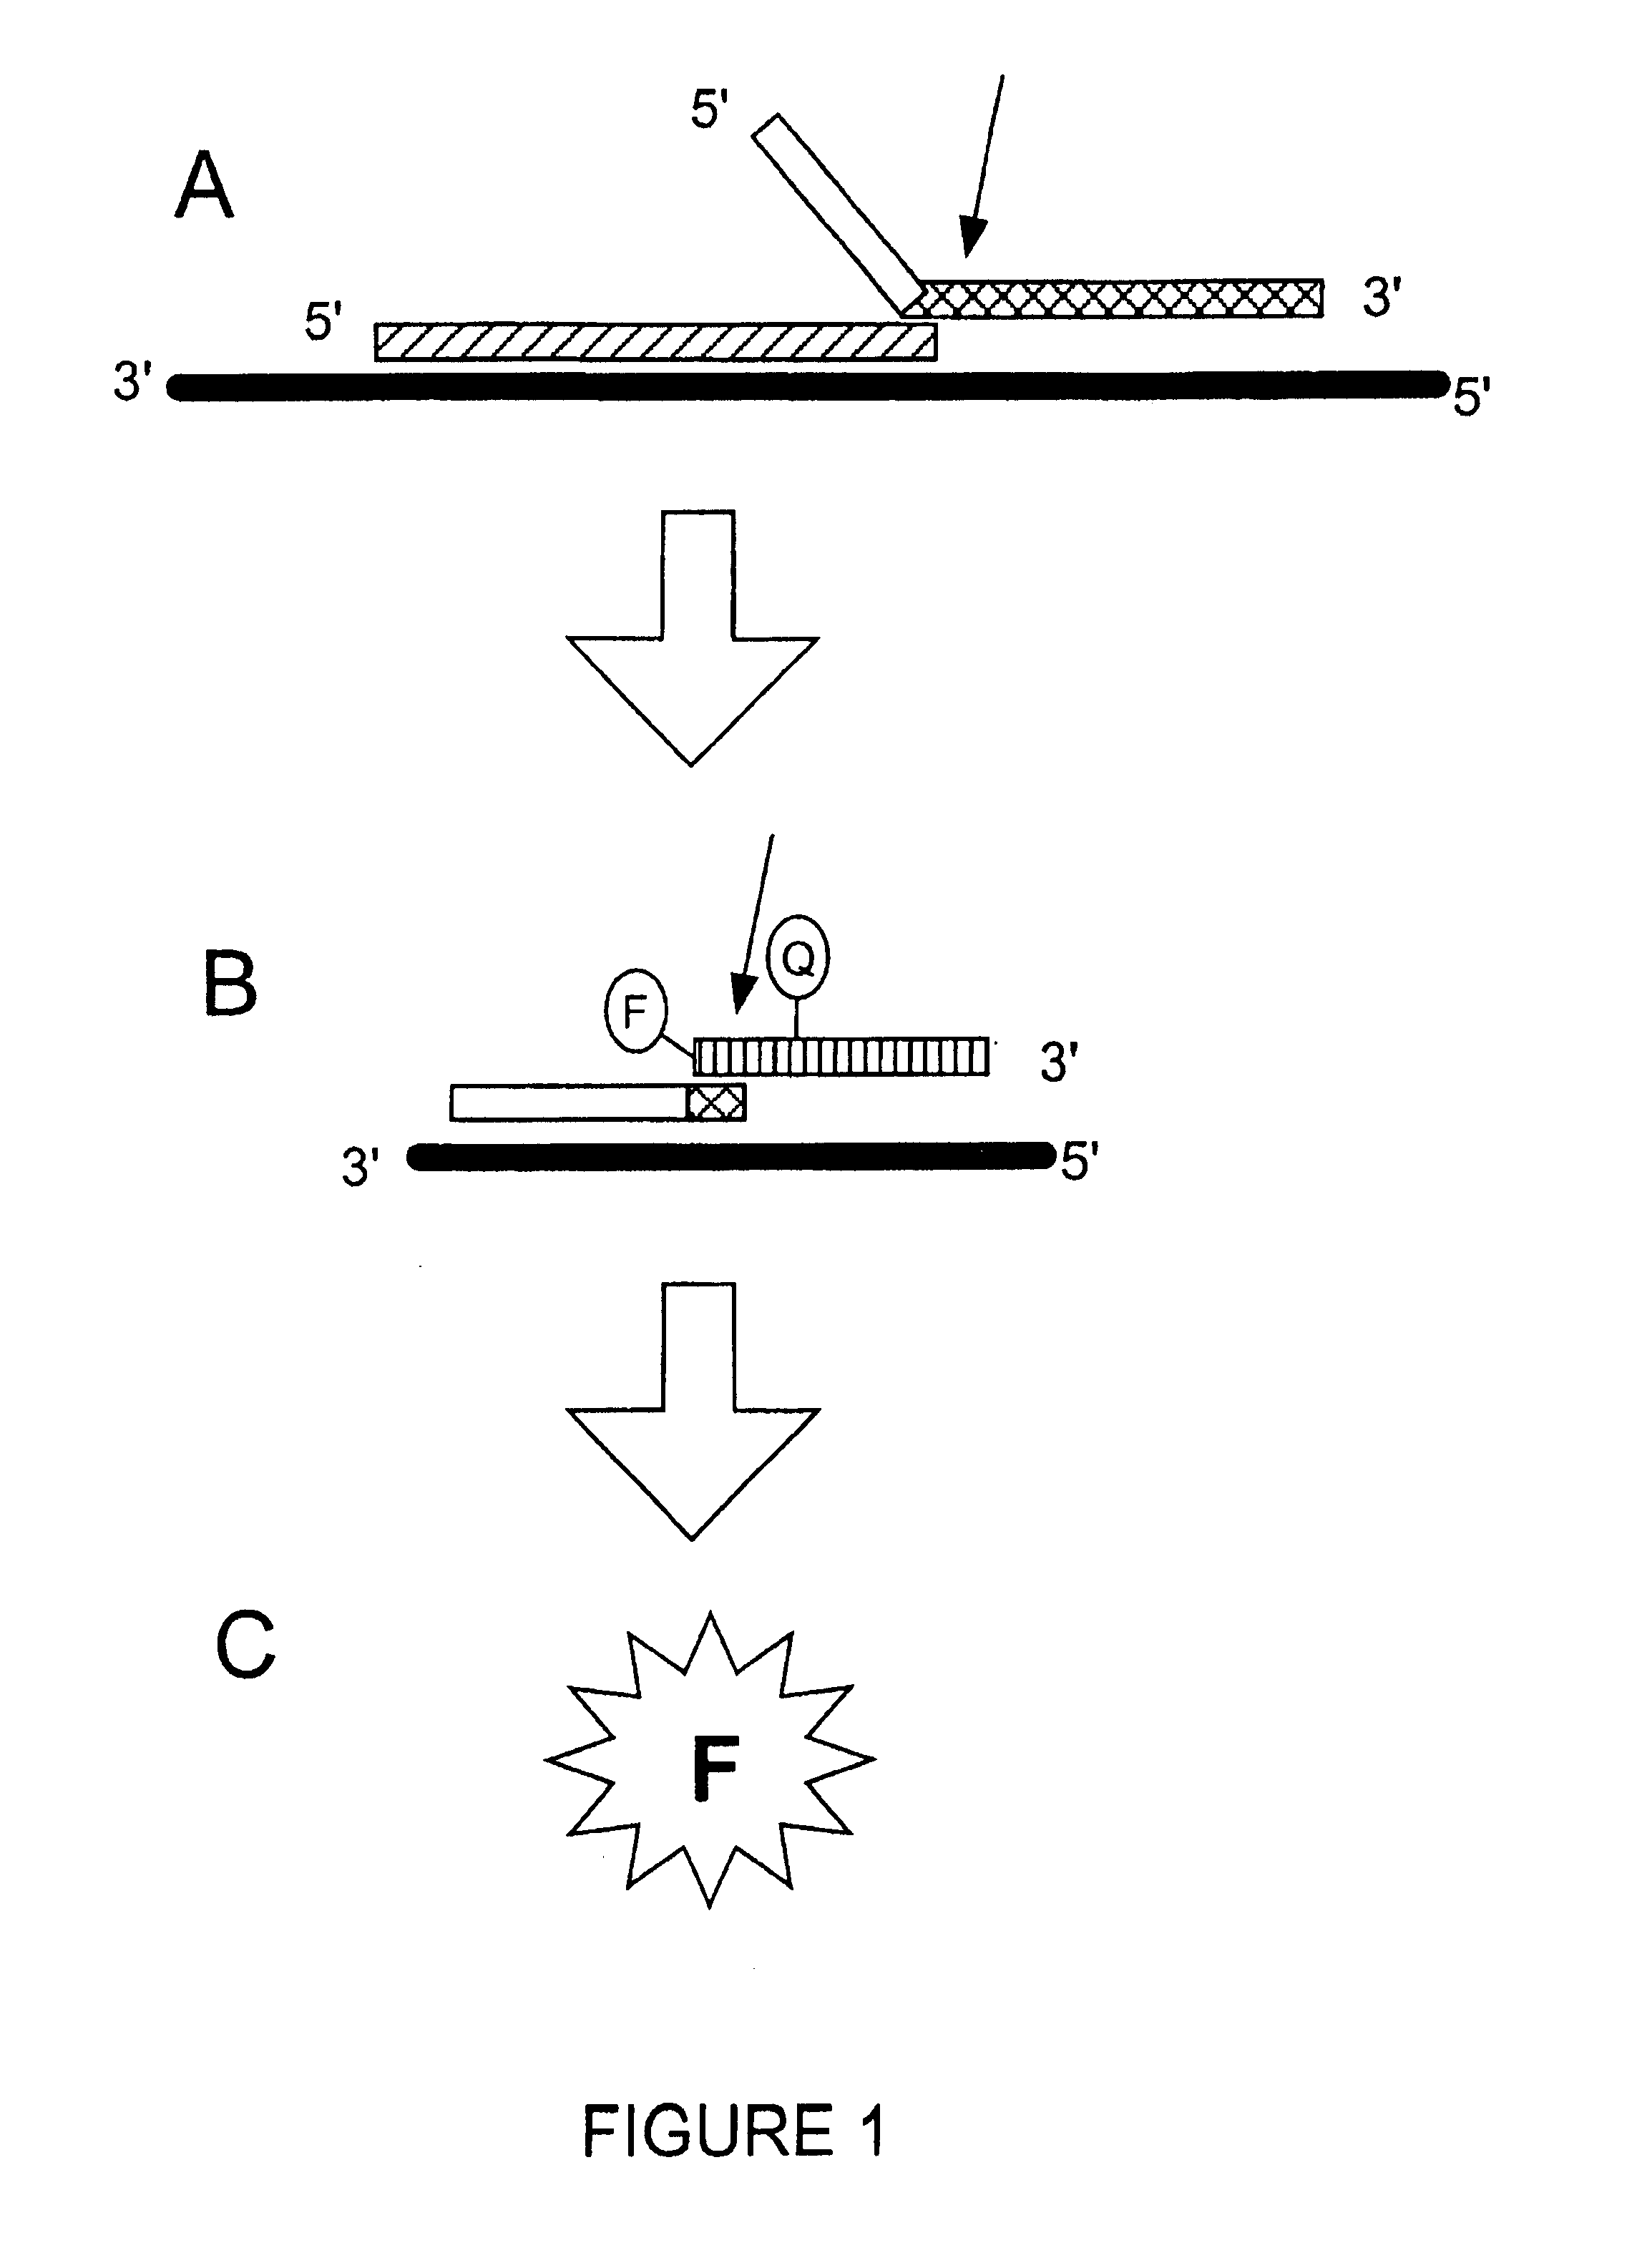 Detection of RNA Sequences